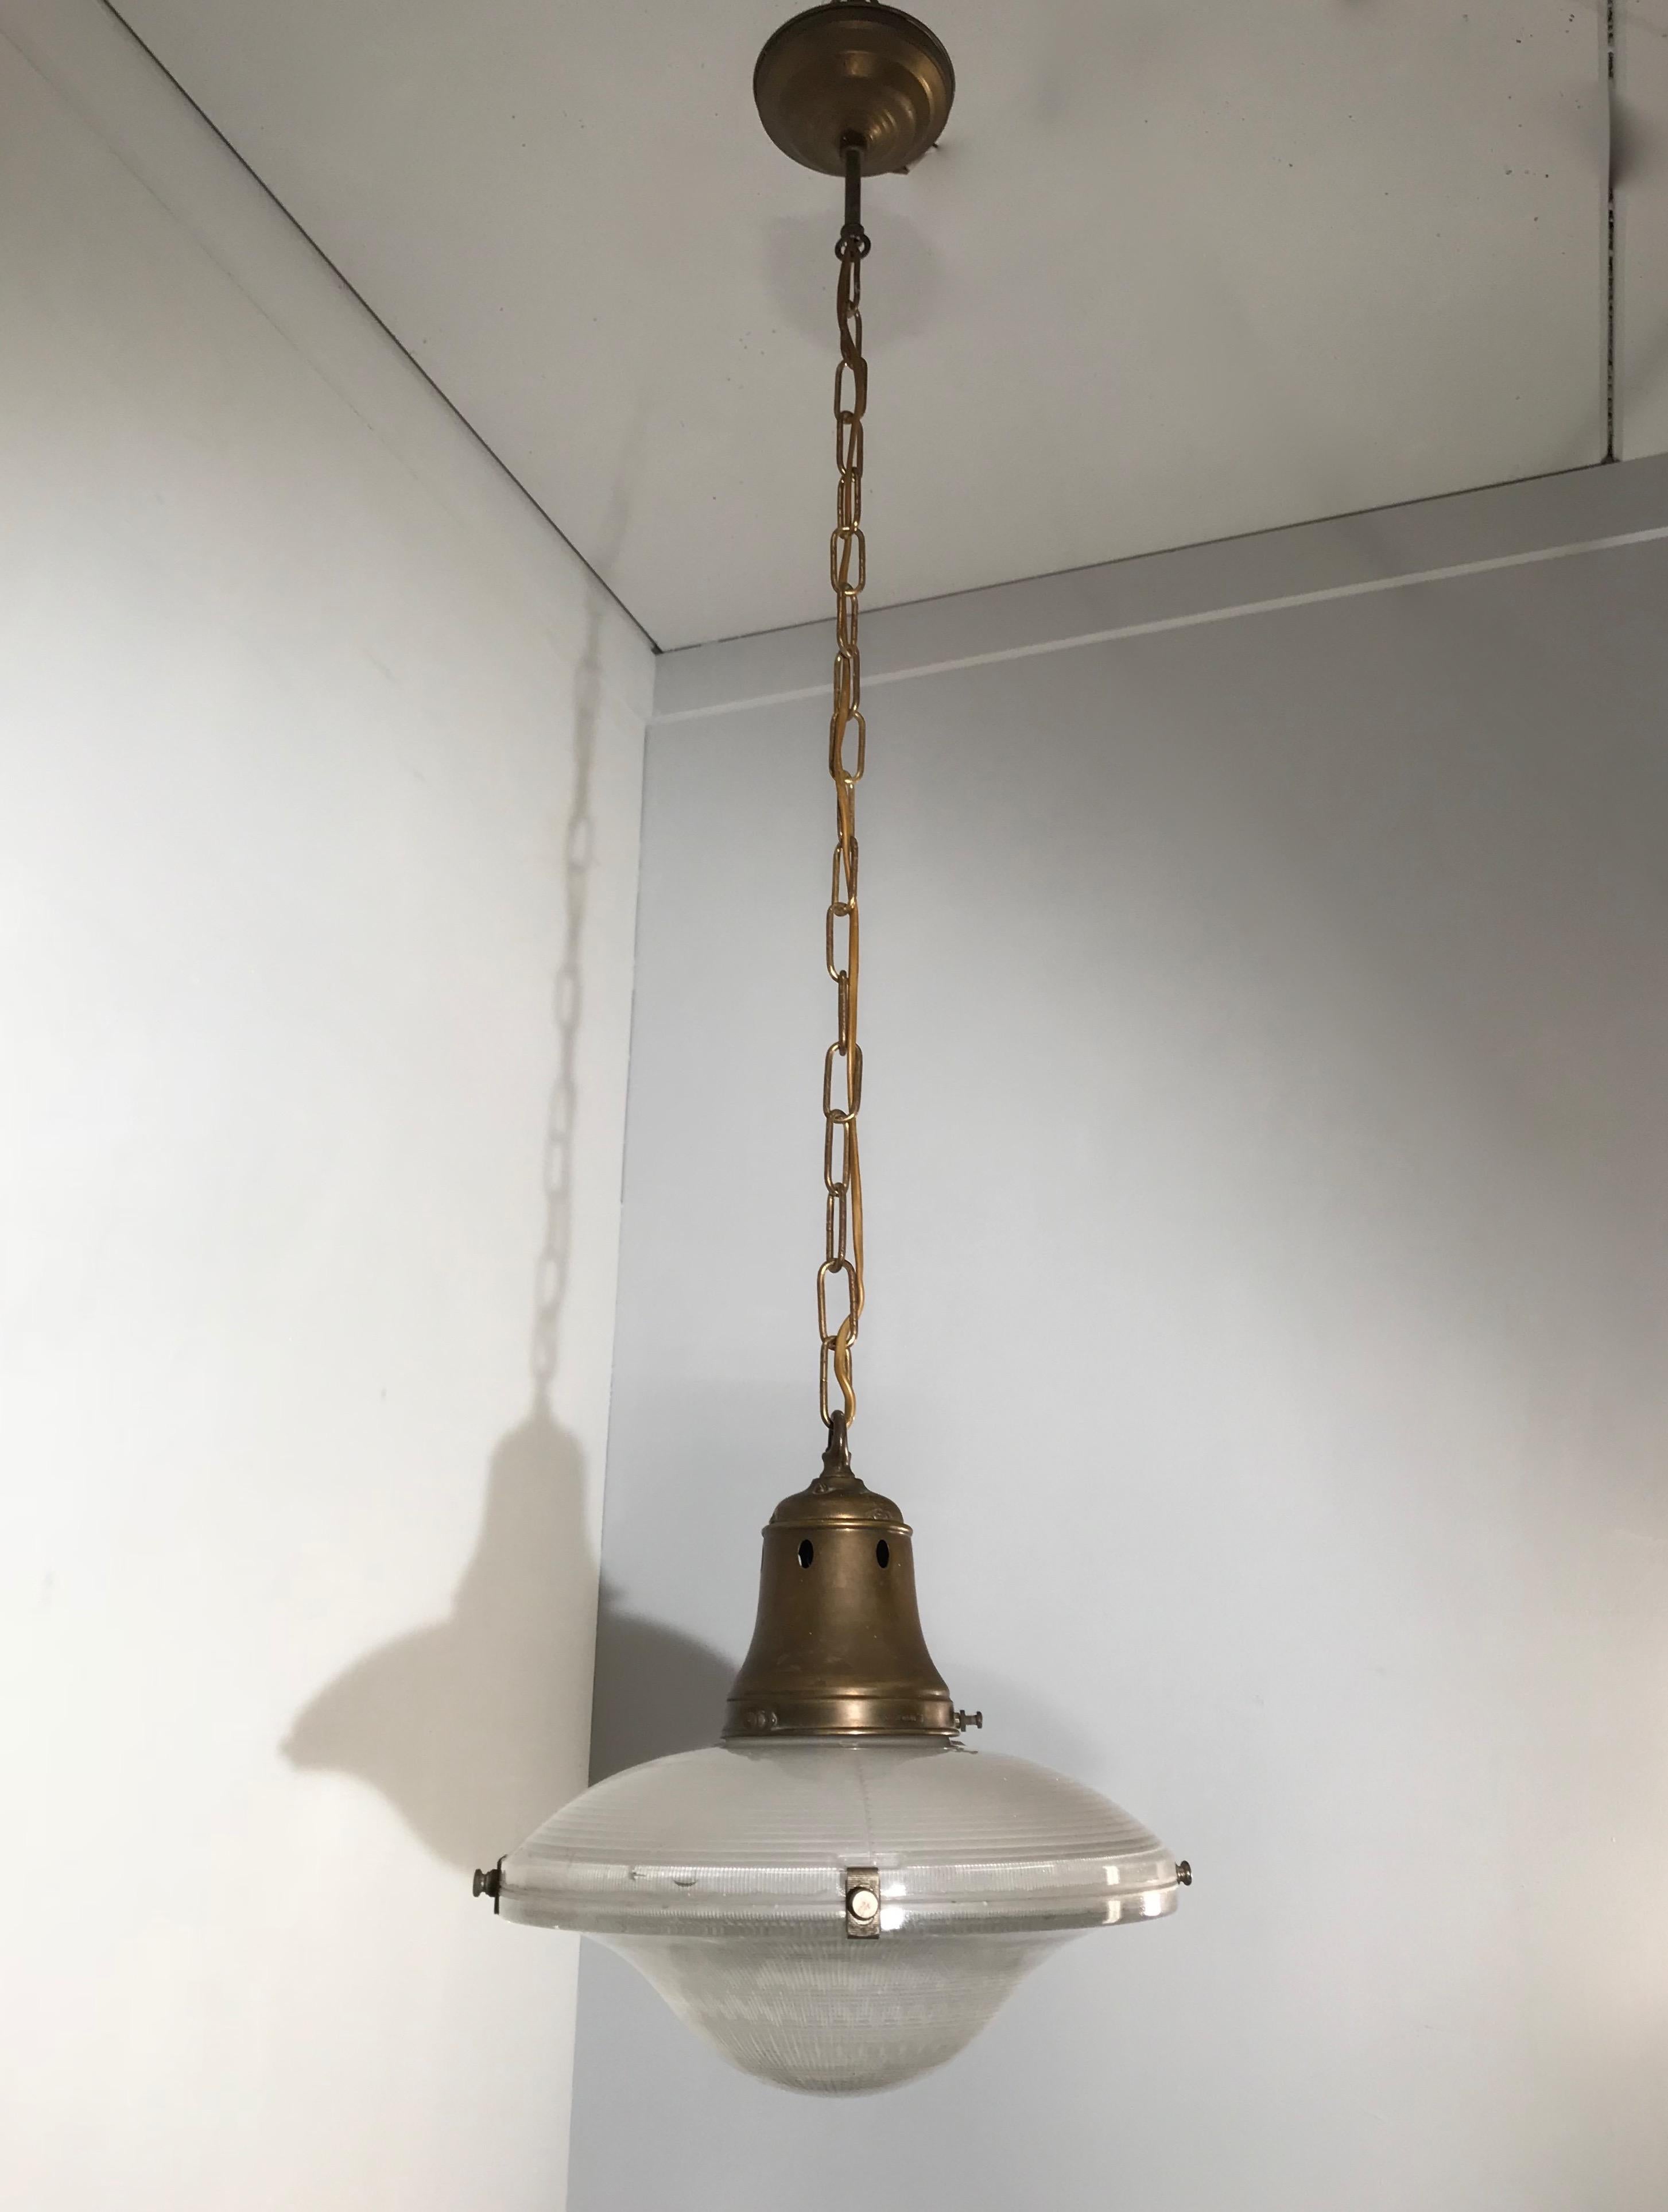 Stylish and museum condition Holophane pendant.

It does not matter whether you are decorating an Art Deco, a Mid-Century Modern or a contemporary home or office, if you have the right space then this stunning, timeless and practical size Holophane